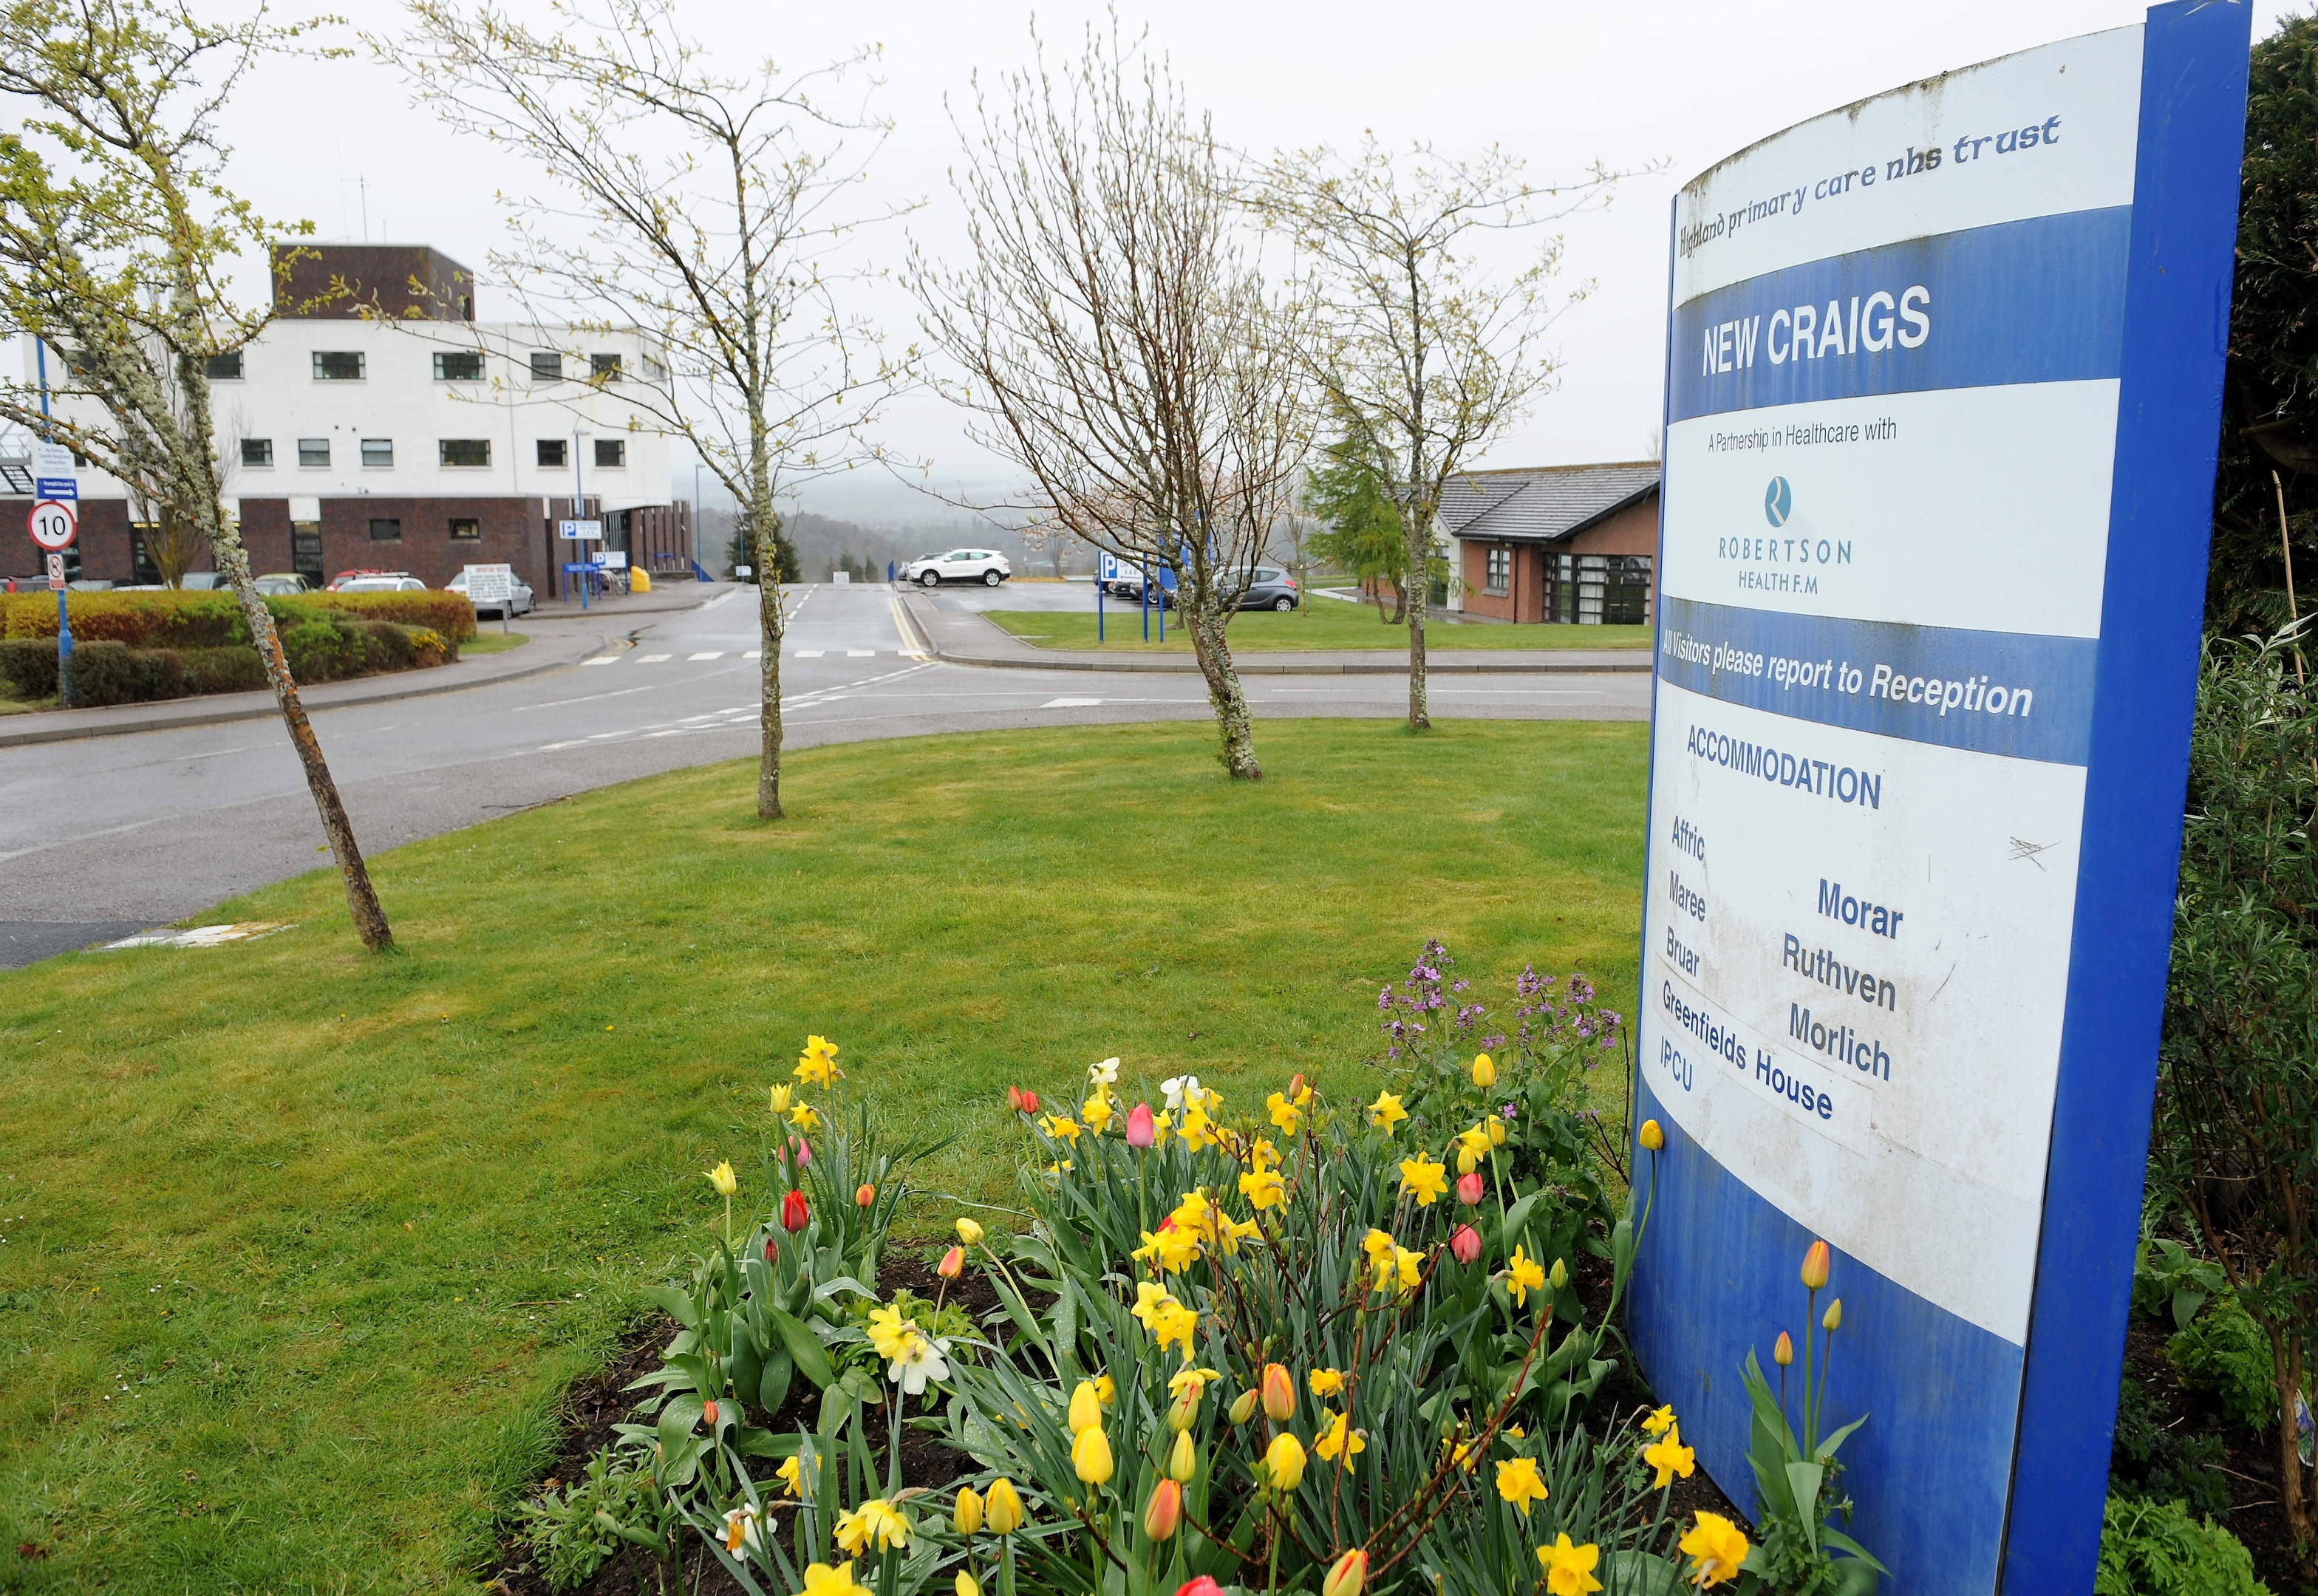 New Craigs Hospital where a patient was misdiagnosed and given the wrong medication.